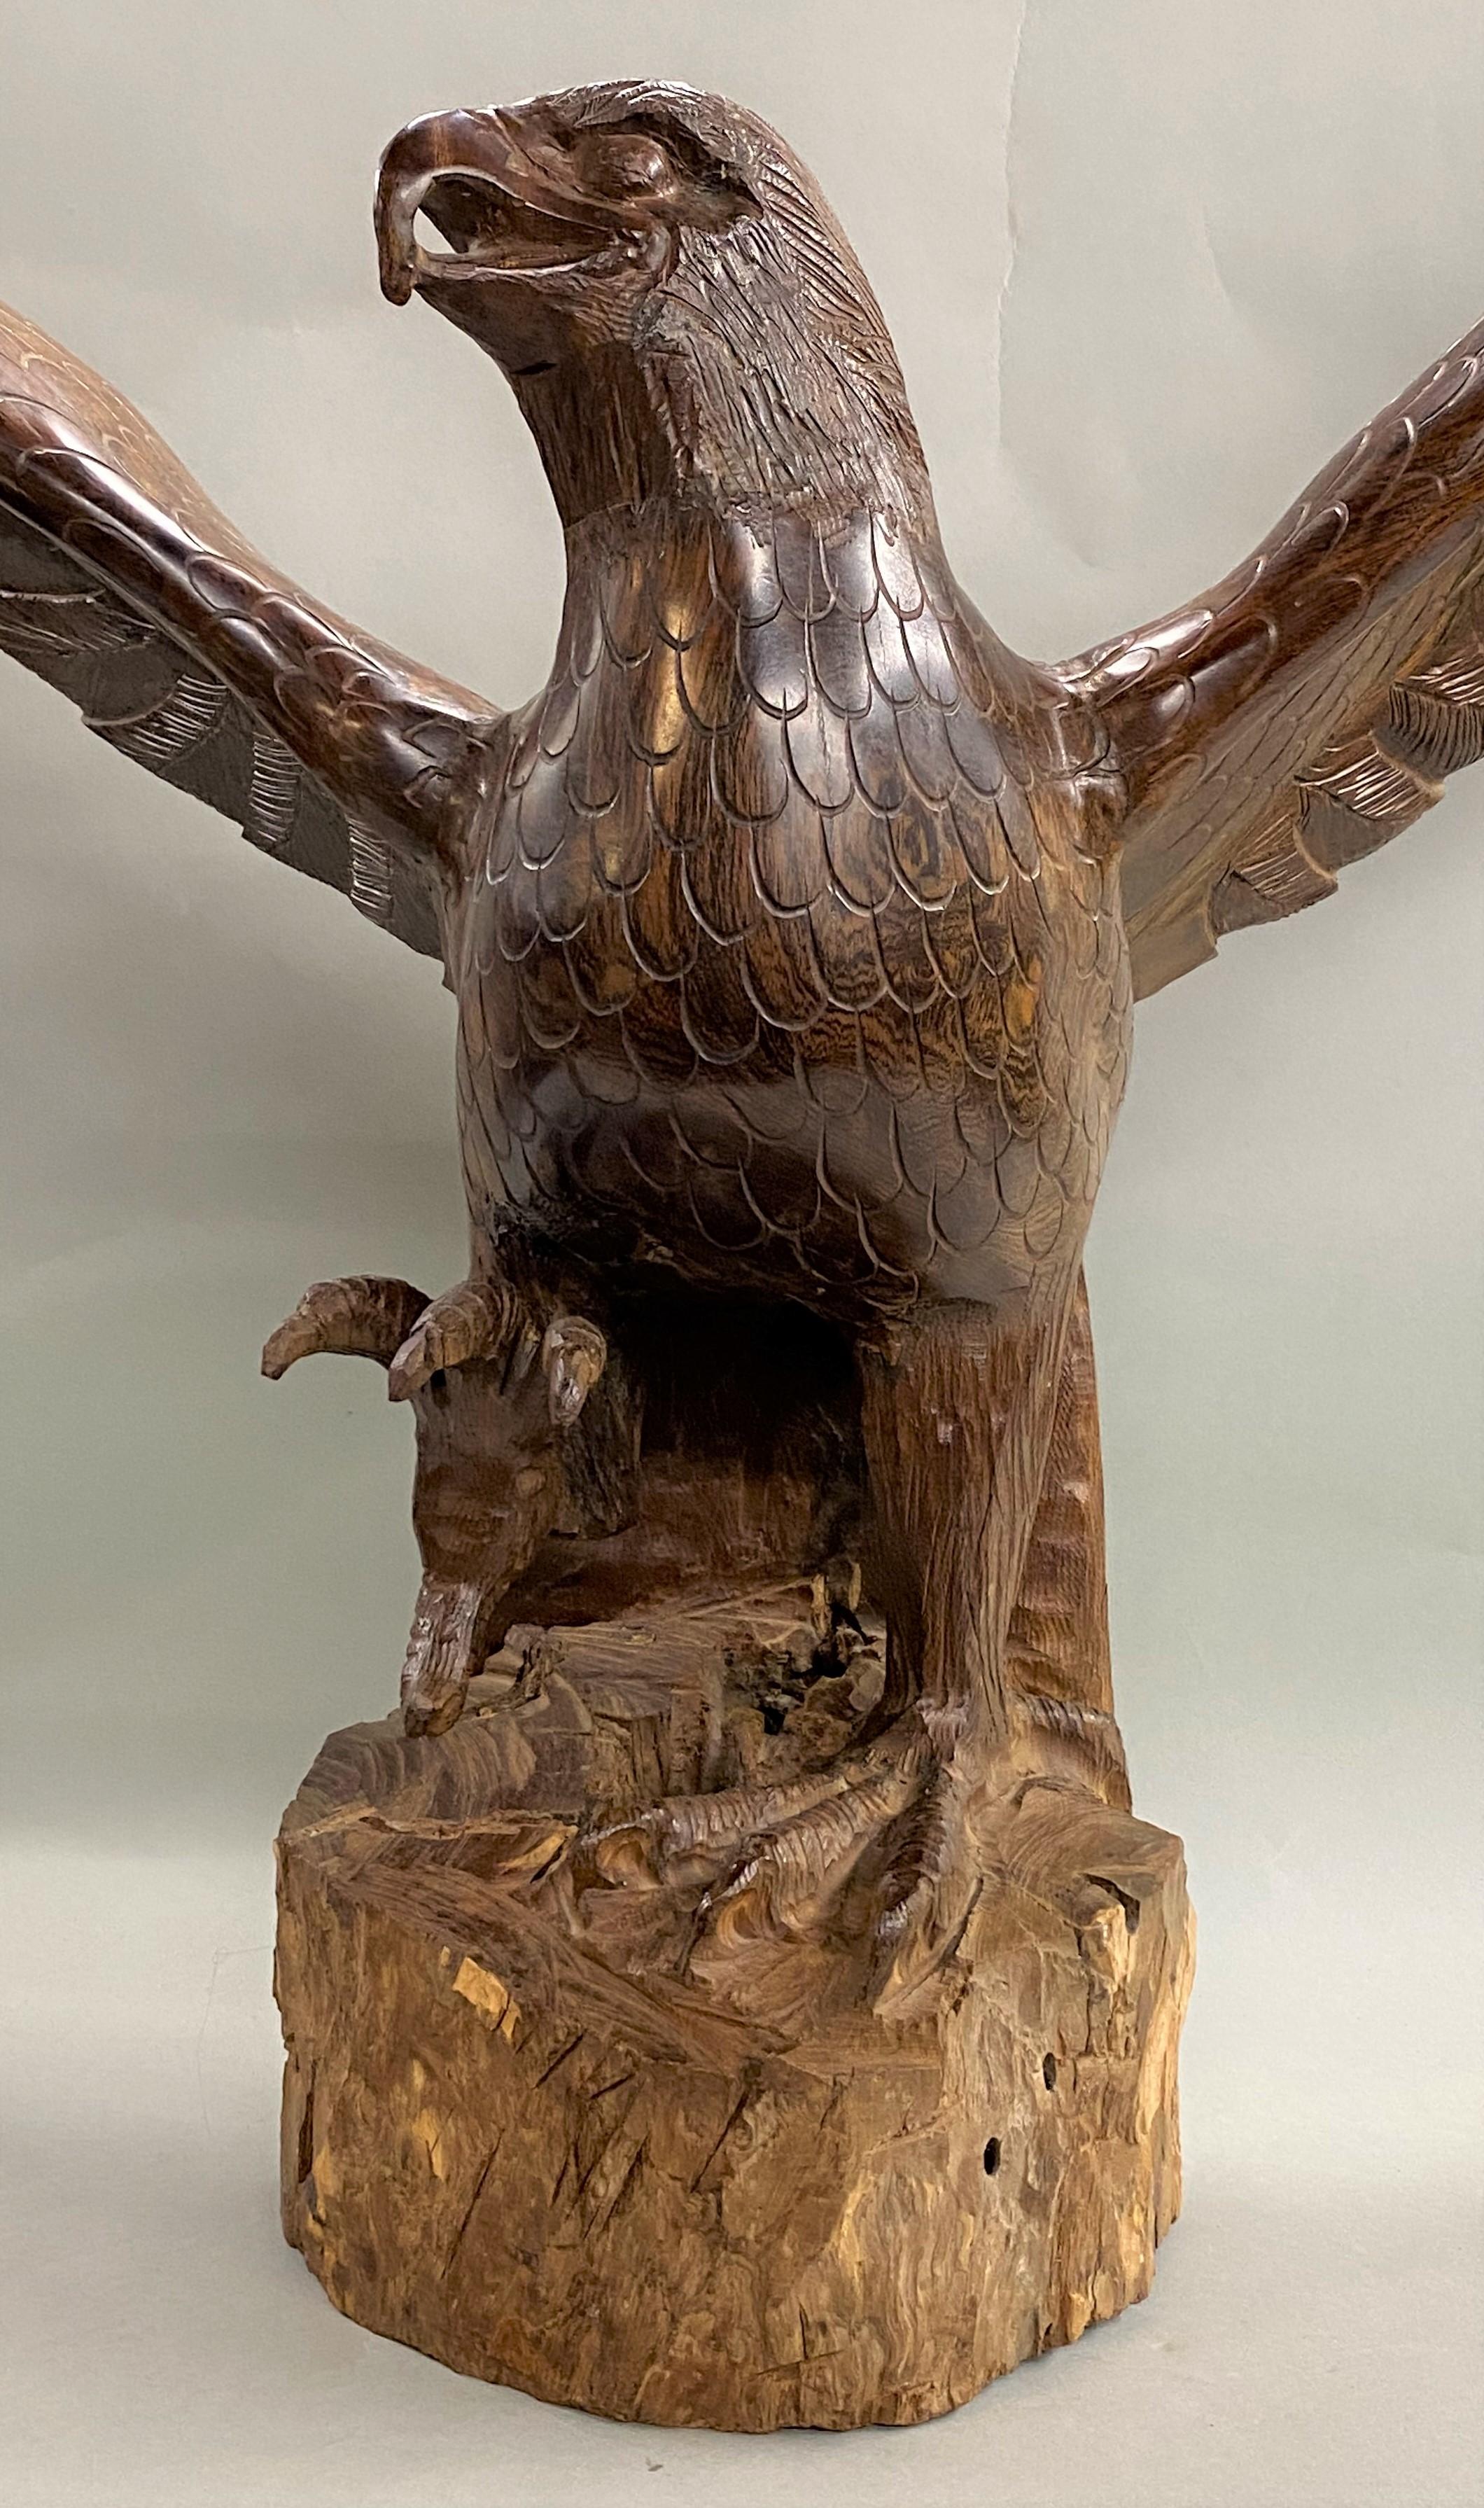 A wonderful folk art hand carved majestic ironwood eagle in the Black Forest style, with full wingspan and one claw extended forward, nice wing and feather detail, unsigned, dating to the 20th century. Very good overall condition, with some edge and